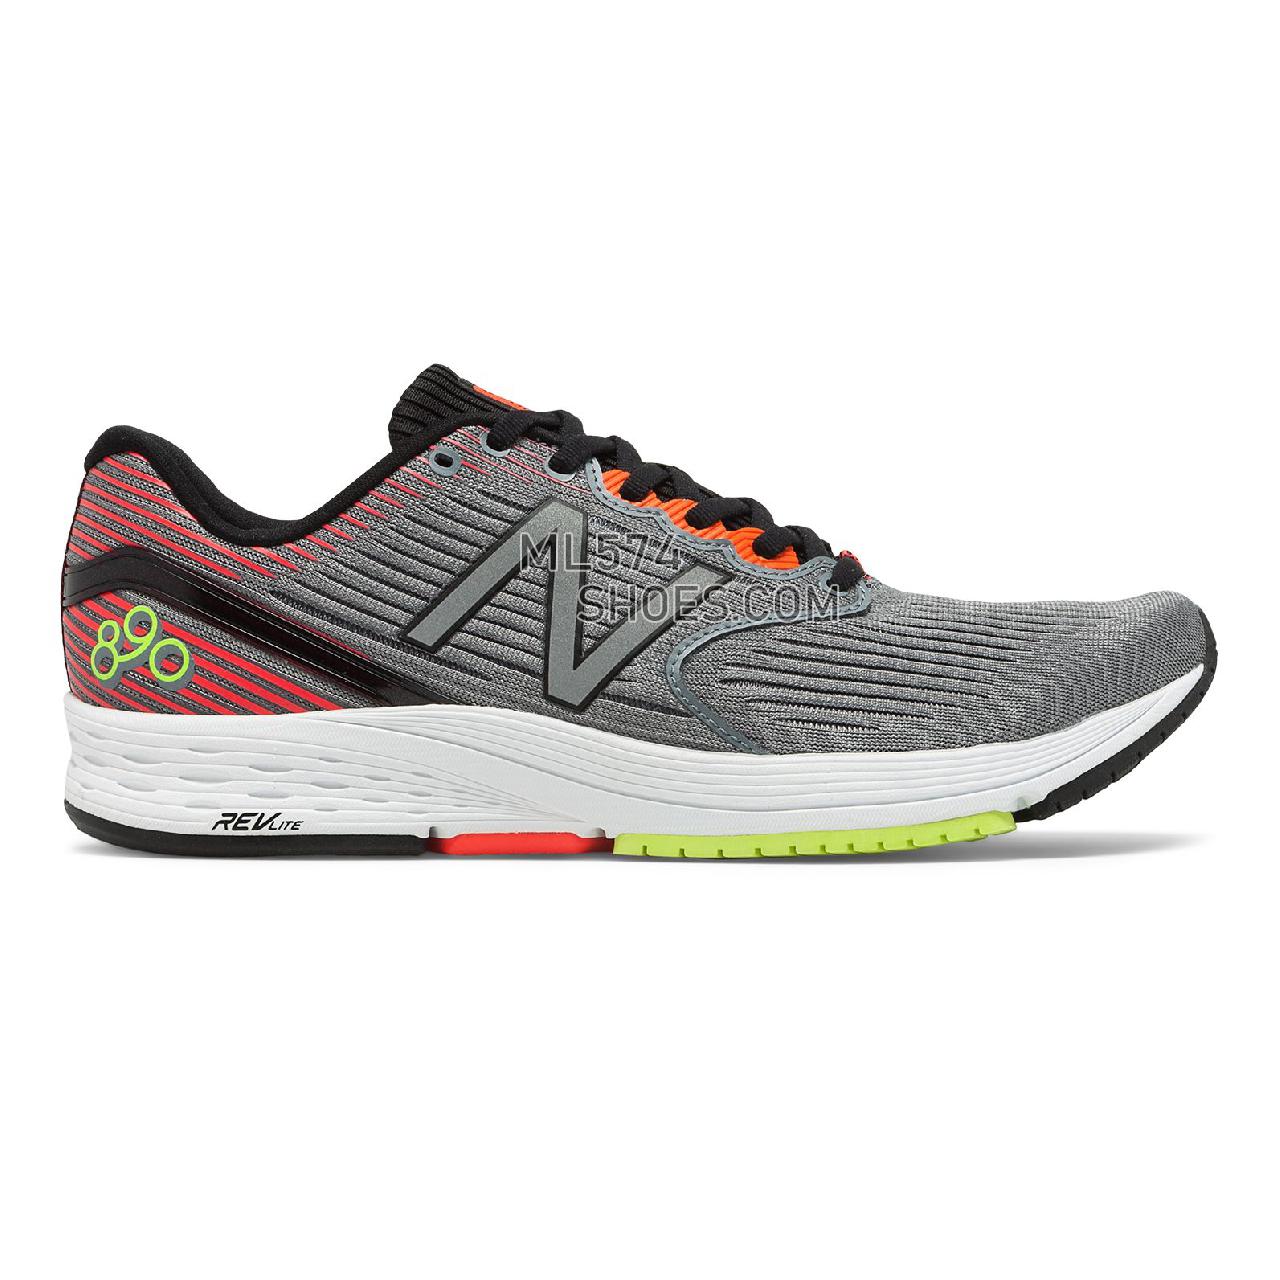 New Balance 890v6 - Men's 890 - Running Grey with Flame - M890GF6